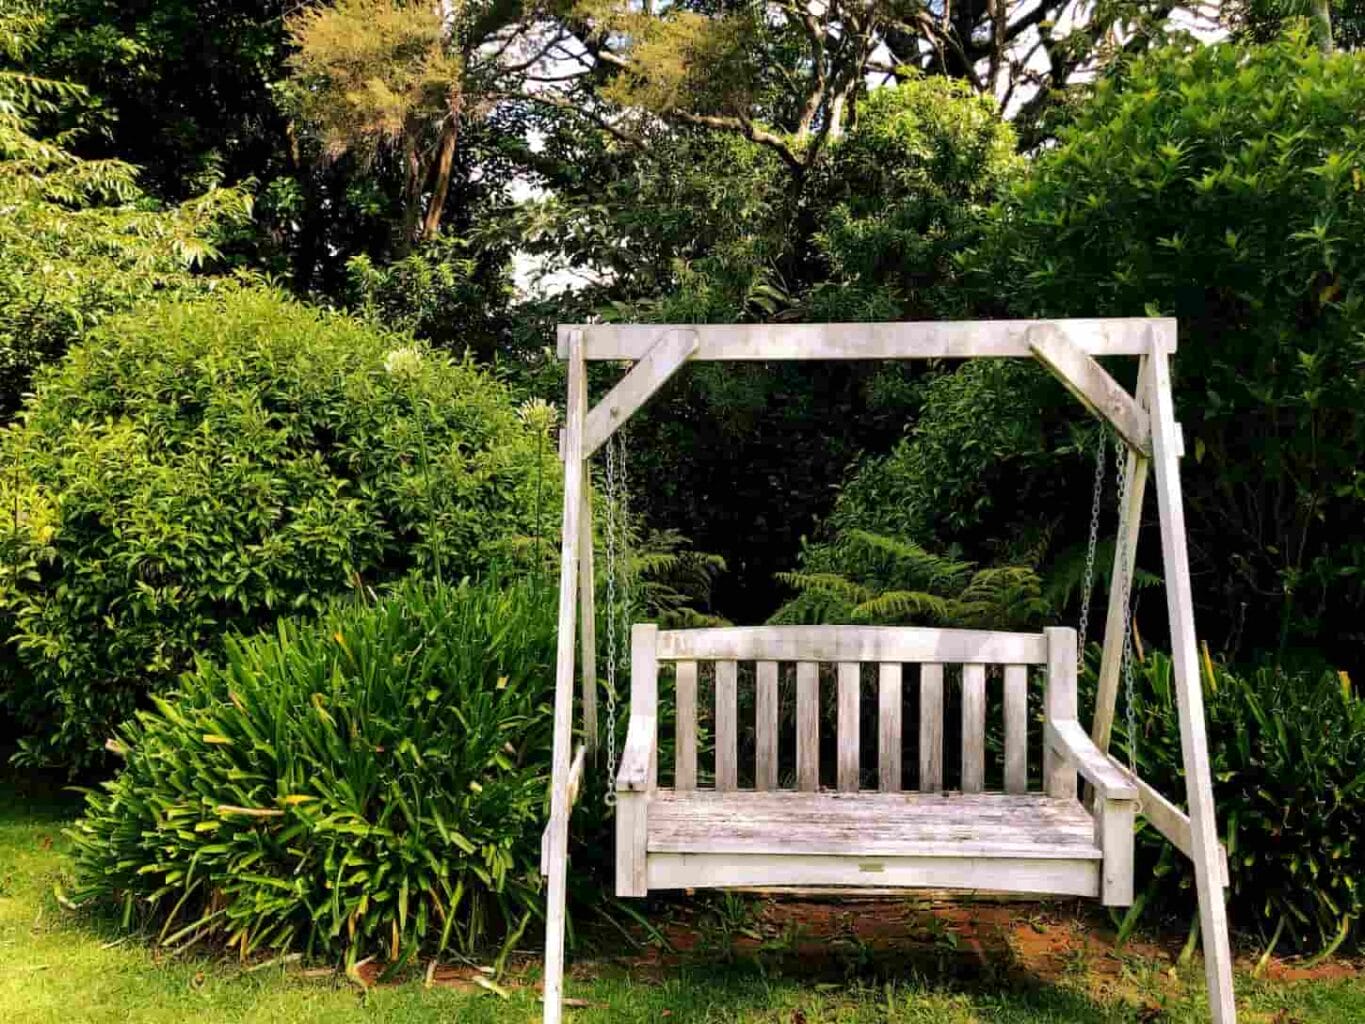 An image of a Wooden bench swing in the garden.